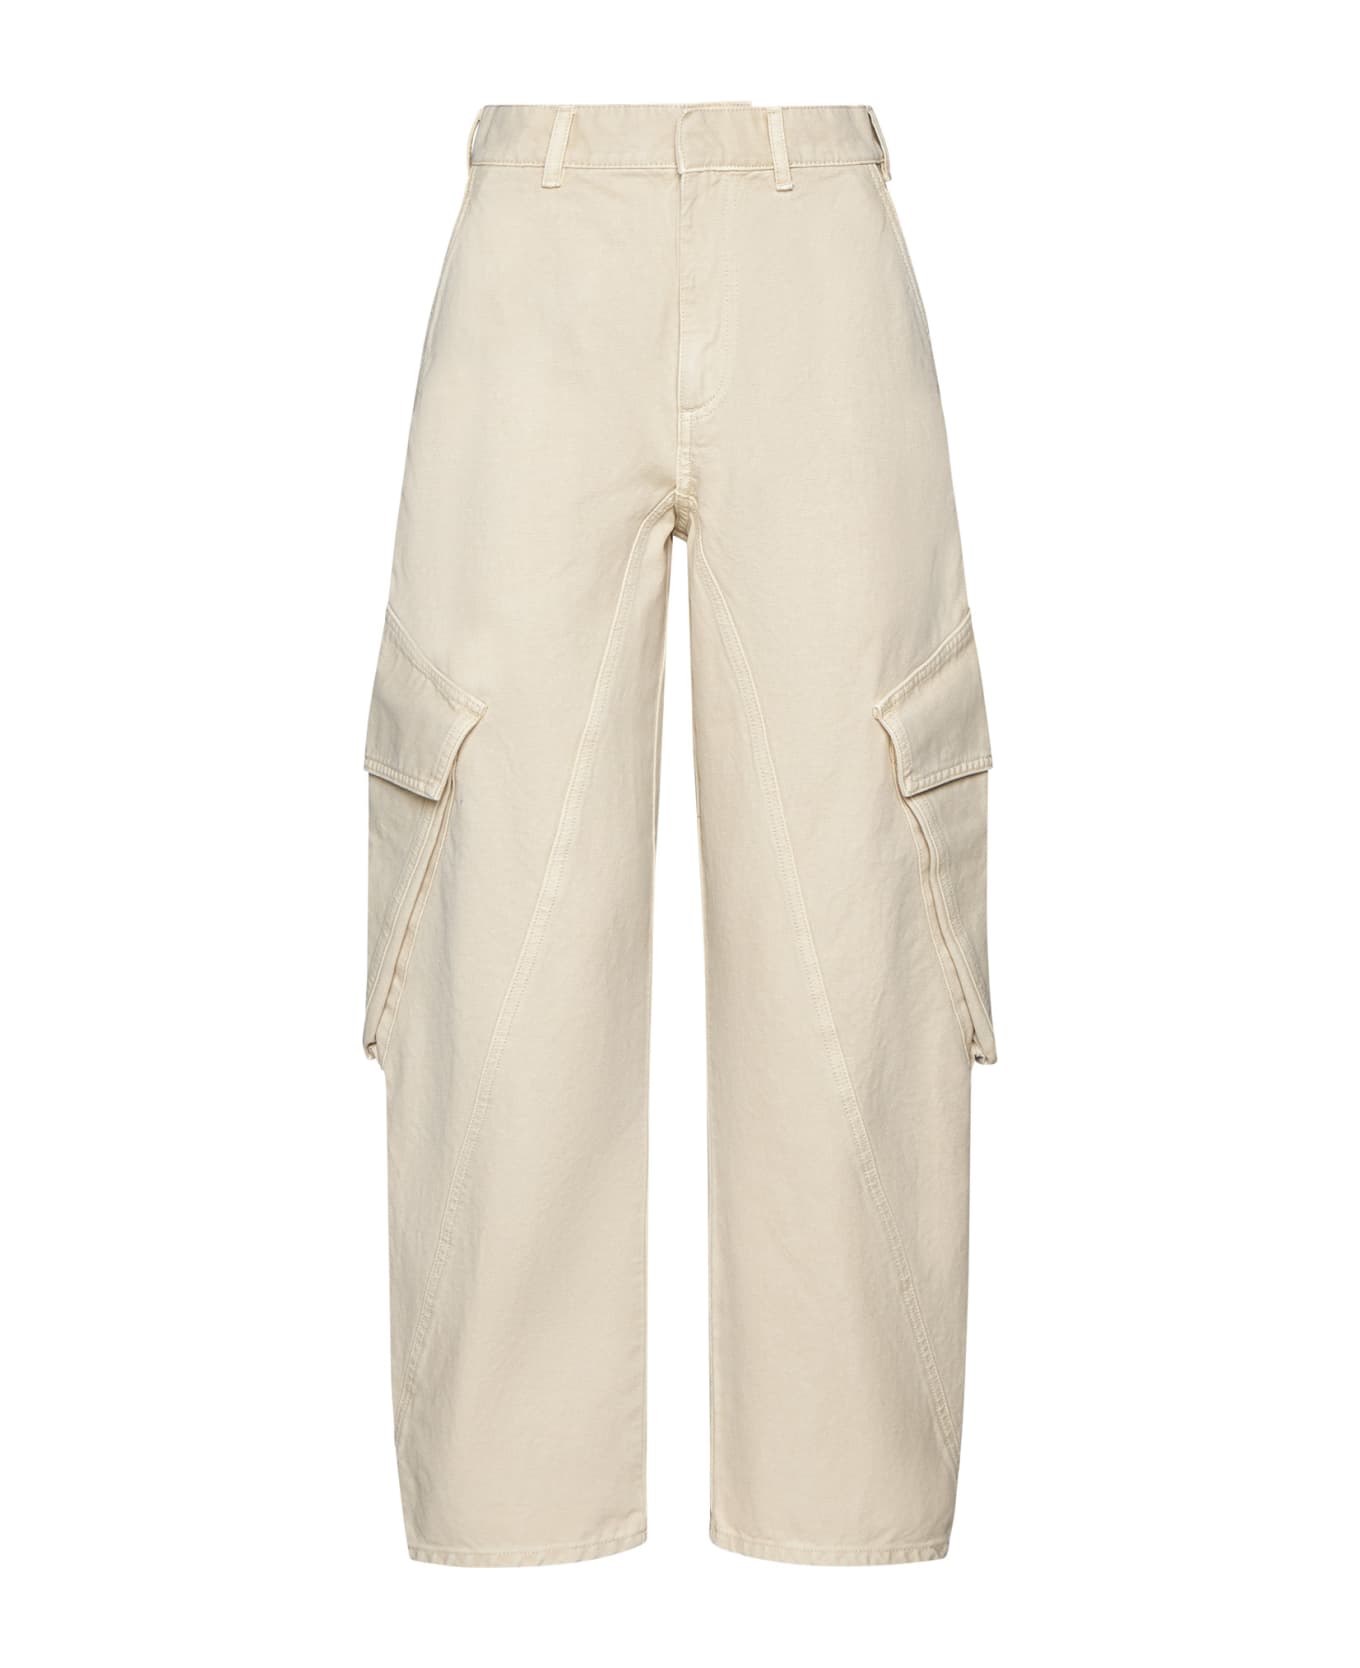 J.W. Anderson Cream White Twisted Cargo Jeans - Chalk